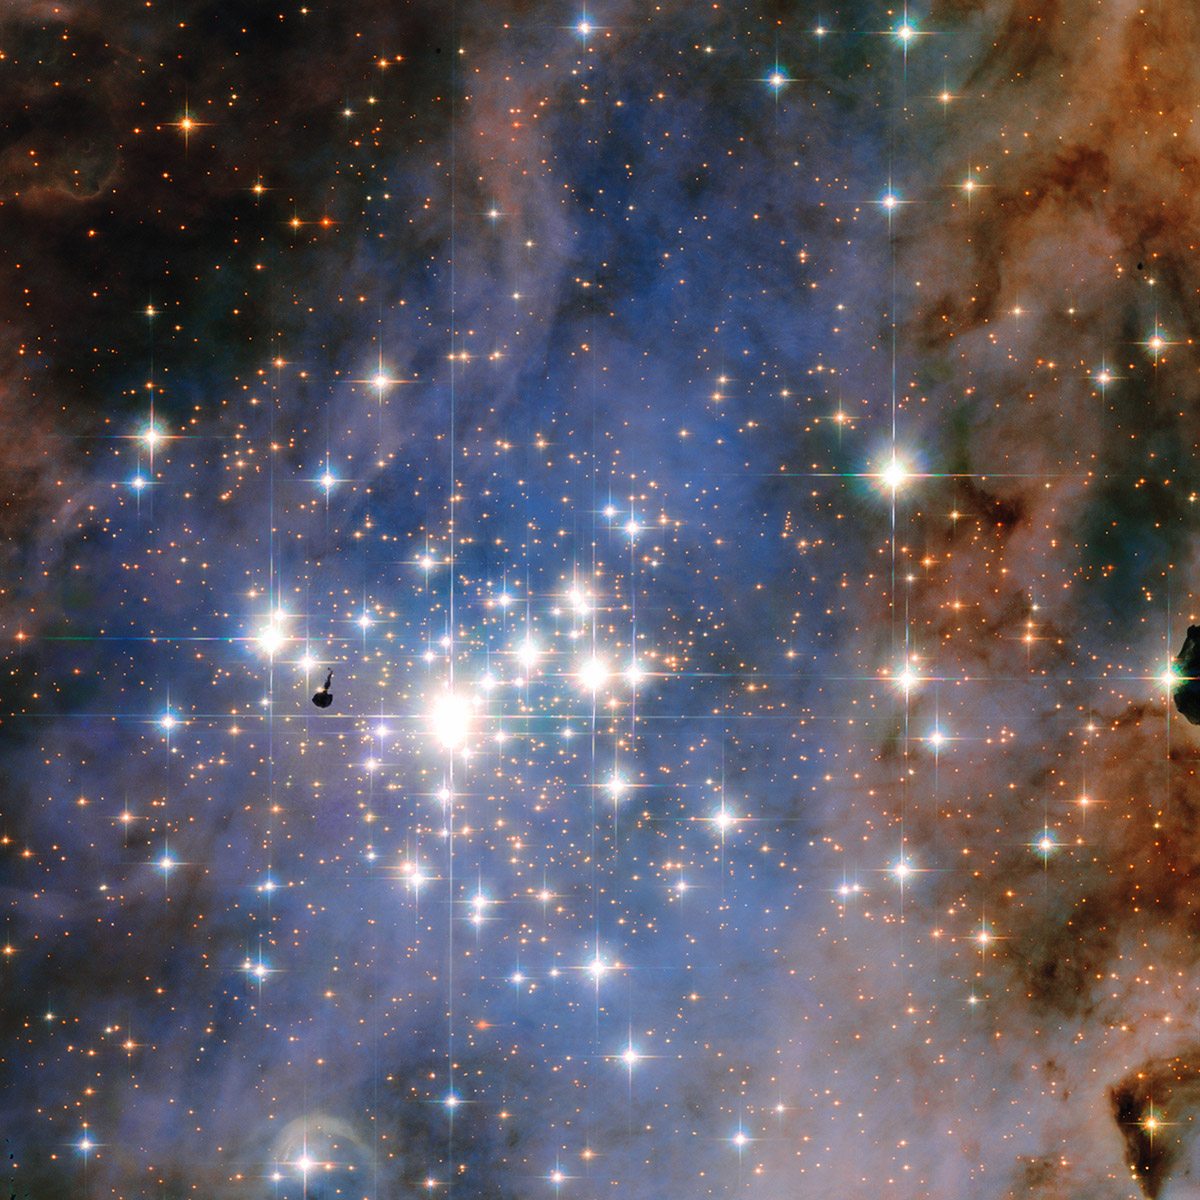 This image from NASA's Hubble Space Telescope shows Trumpler 14, a glittering star cluster that contains a collection of some of the brightest stars seen in our Milky Way galaxy, Jan. 21, 2016.